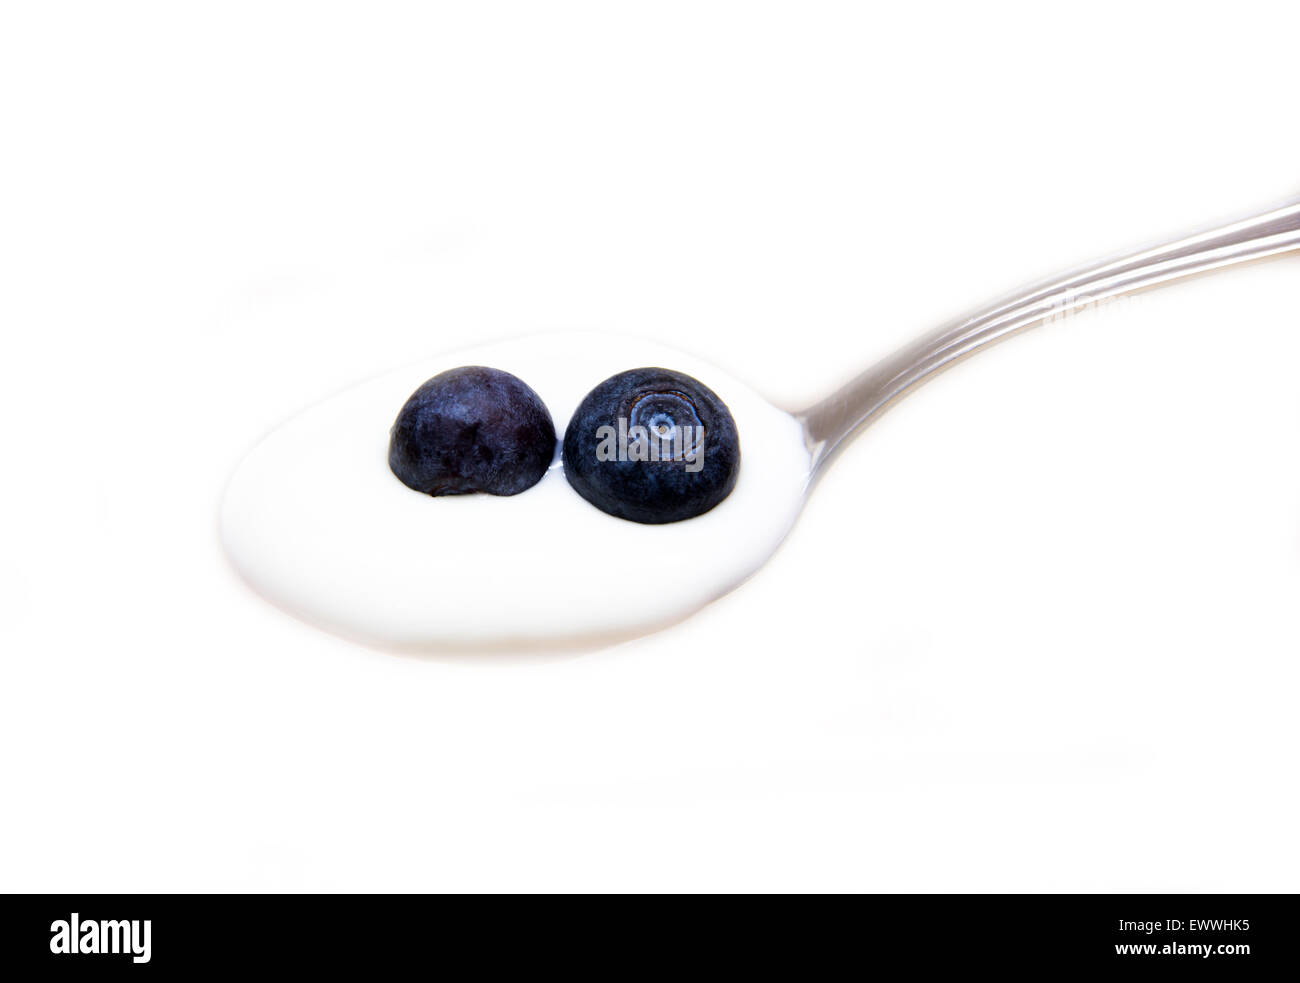 Spoon with yogurt and blueberries on white background Stock Photo